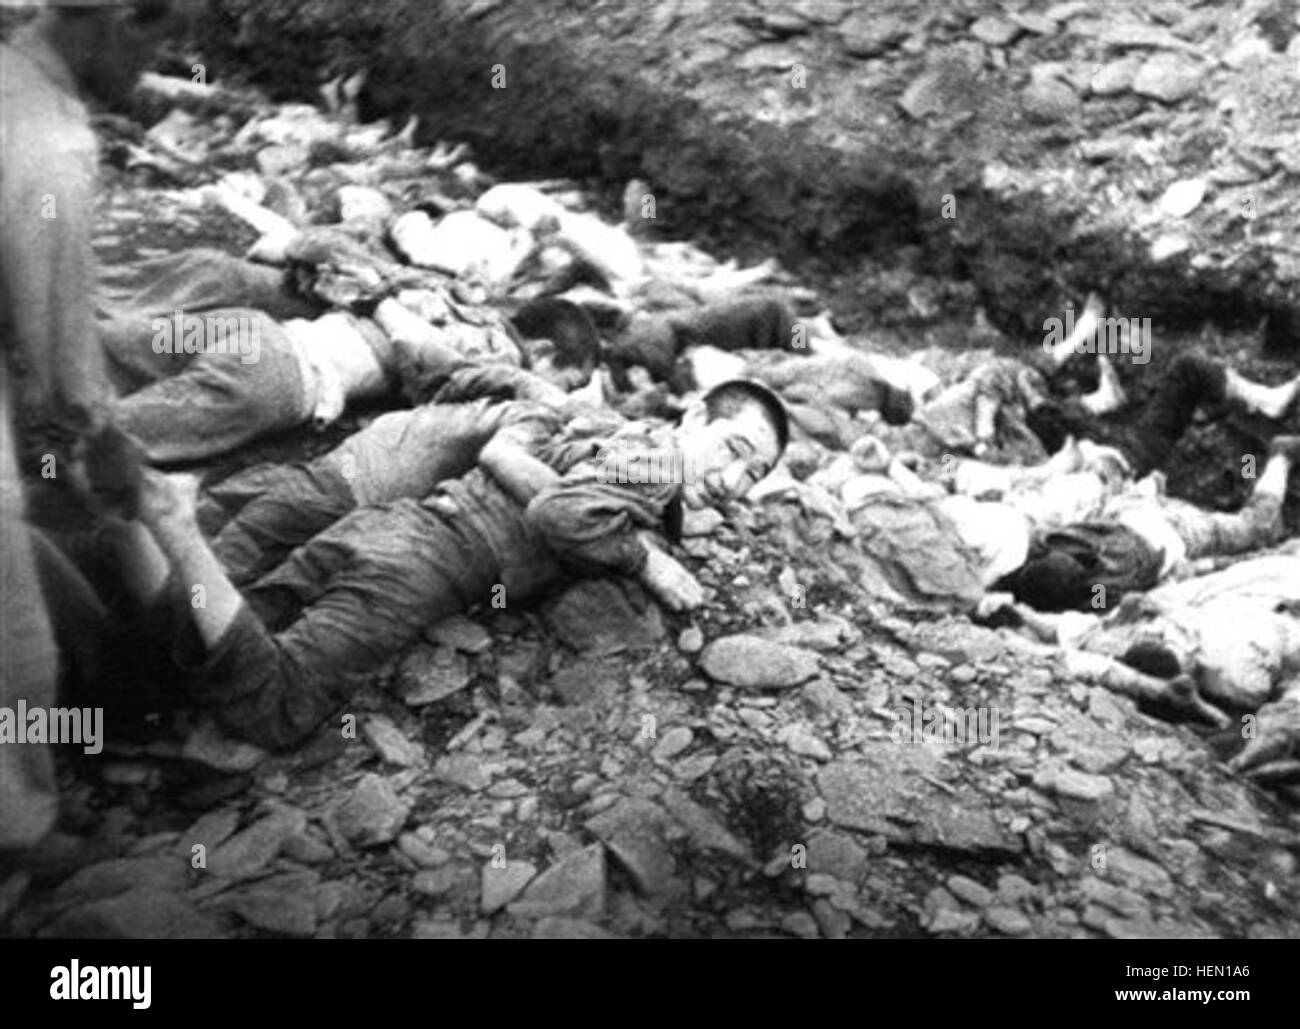 FILE - In this July 1950 U.S. Army file photograph once classified 'top secret,' prisoners lie on the ground before their execution by South Korean troops in Taejon, South Korea. Shutting down its inquiry into South Korea's hidden history, a government commission investigating a century of human rights abuses will leave unexplored scores of suspected mass graves believed to hold remains of tens of thousands of South Korean political detainees summarily executed by their government early in the Korean War, sometimes as U.S. officers watched. In a political about-face, the commission, which also Stock Photo